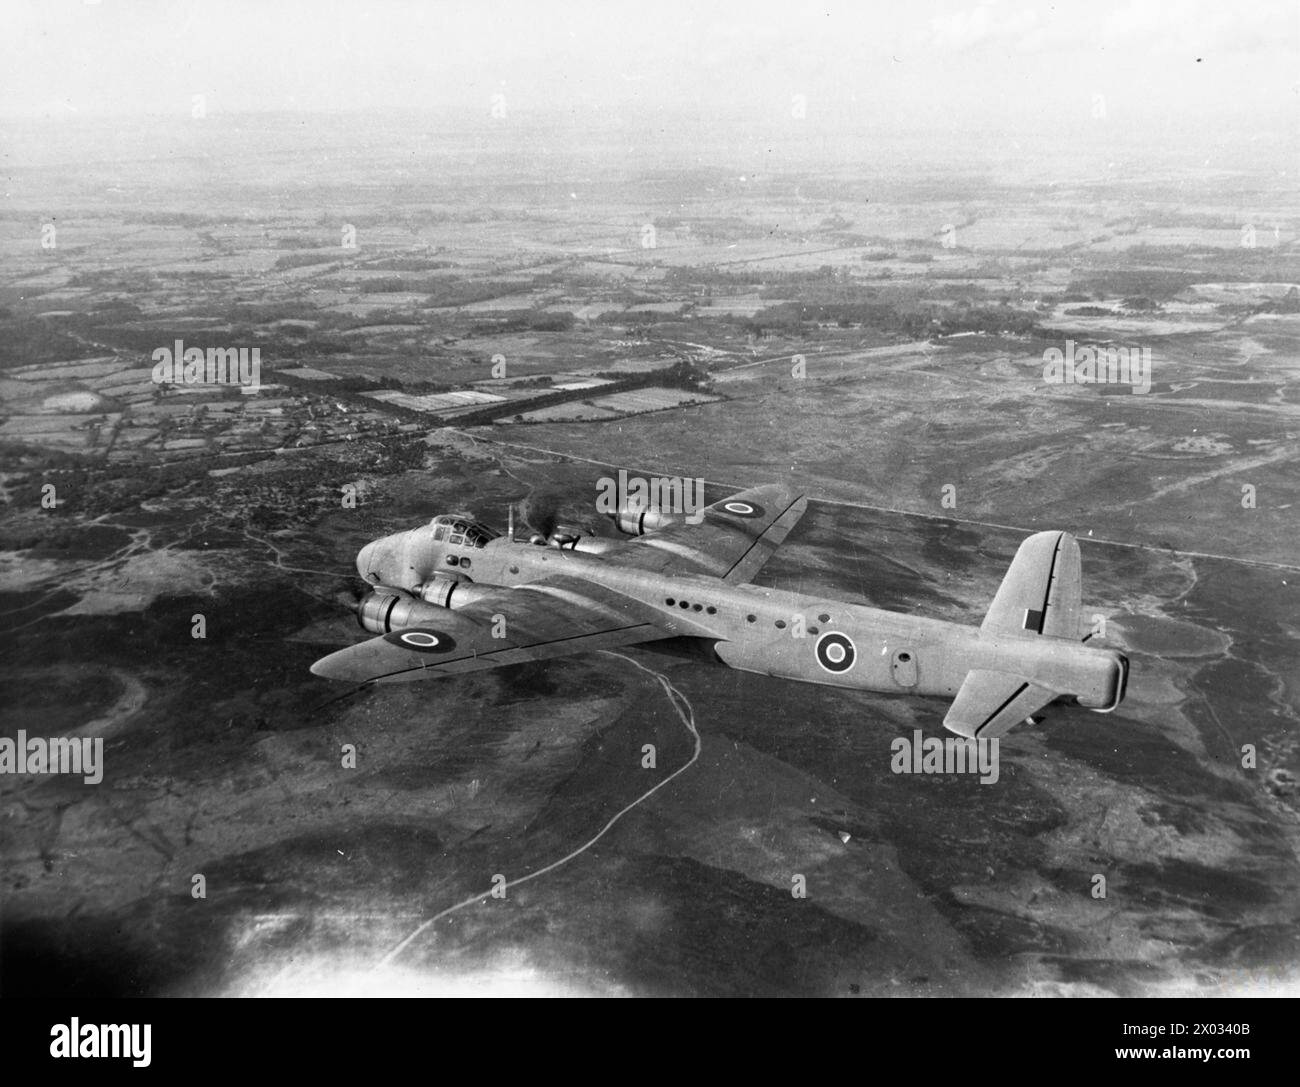 AIRCRAFT OF THE ROYAL AIR FORCE 1939-1945: SHORT S.29 STIRLING. - Stirling Mark V (serial number not discernible) of No 46 Squadron RAF based at Stoney Cross, Hampshire, airborne on a test flight  Royal Air Force, 46 Squadron Stock Photo